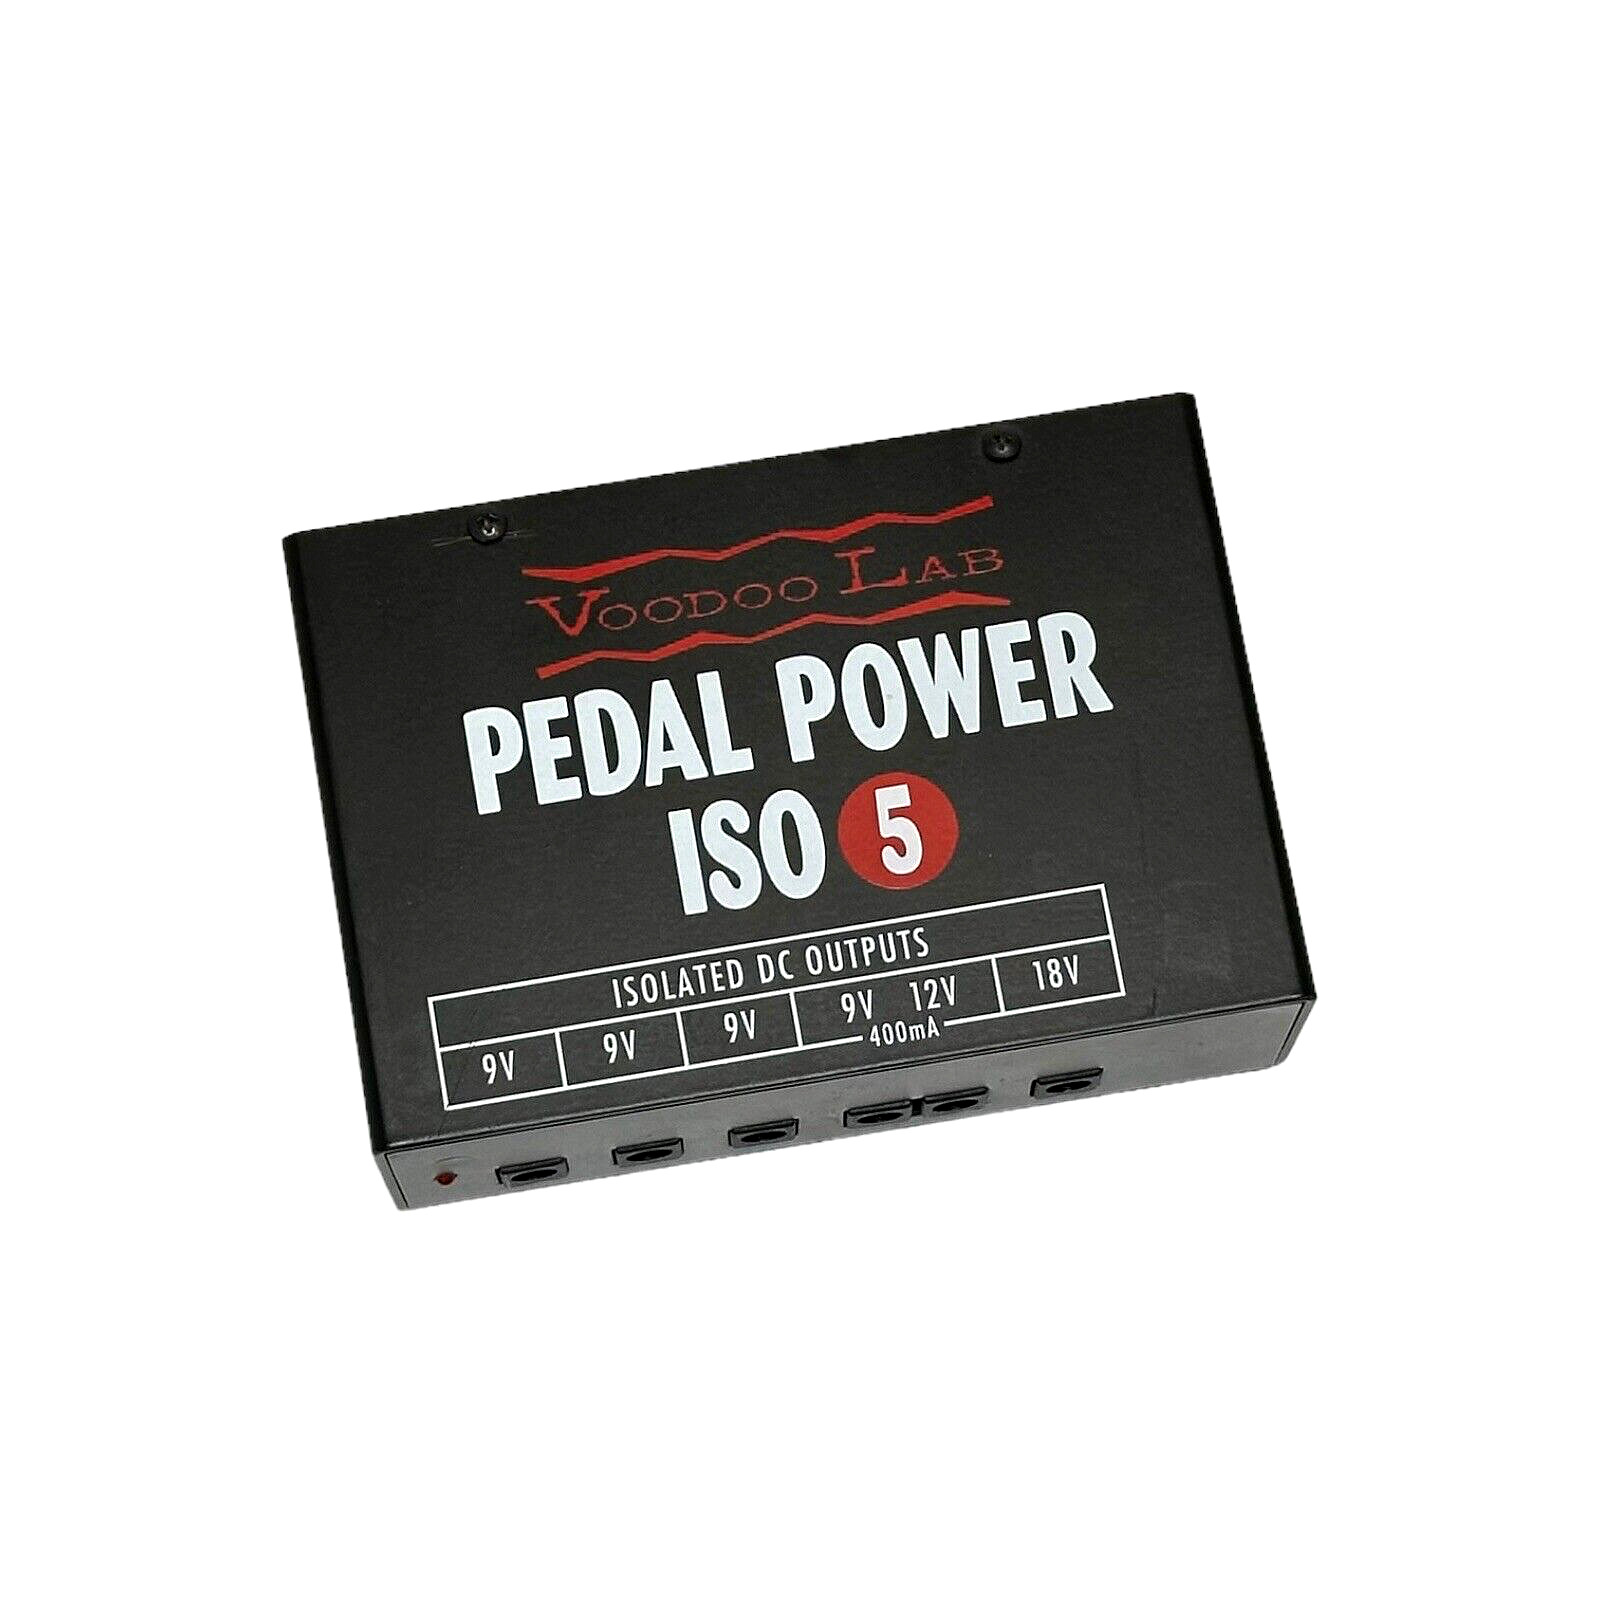 VOODOO LAB PEDAL POWER ISO 5 POWER SUPPLY